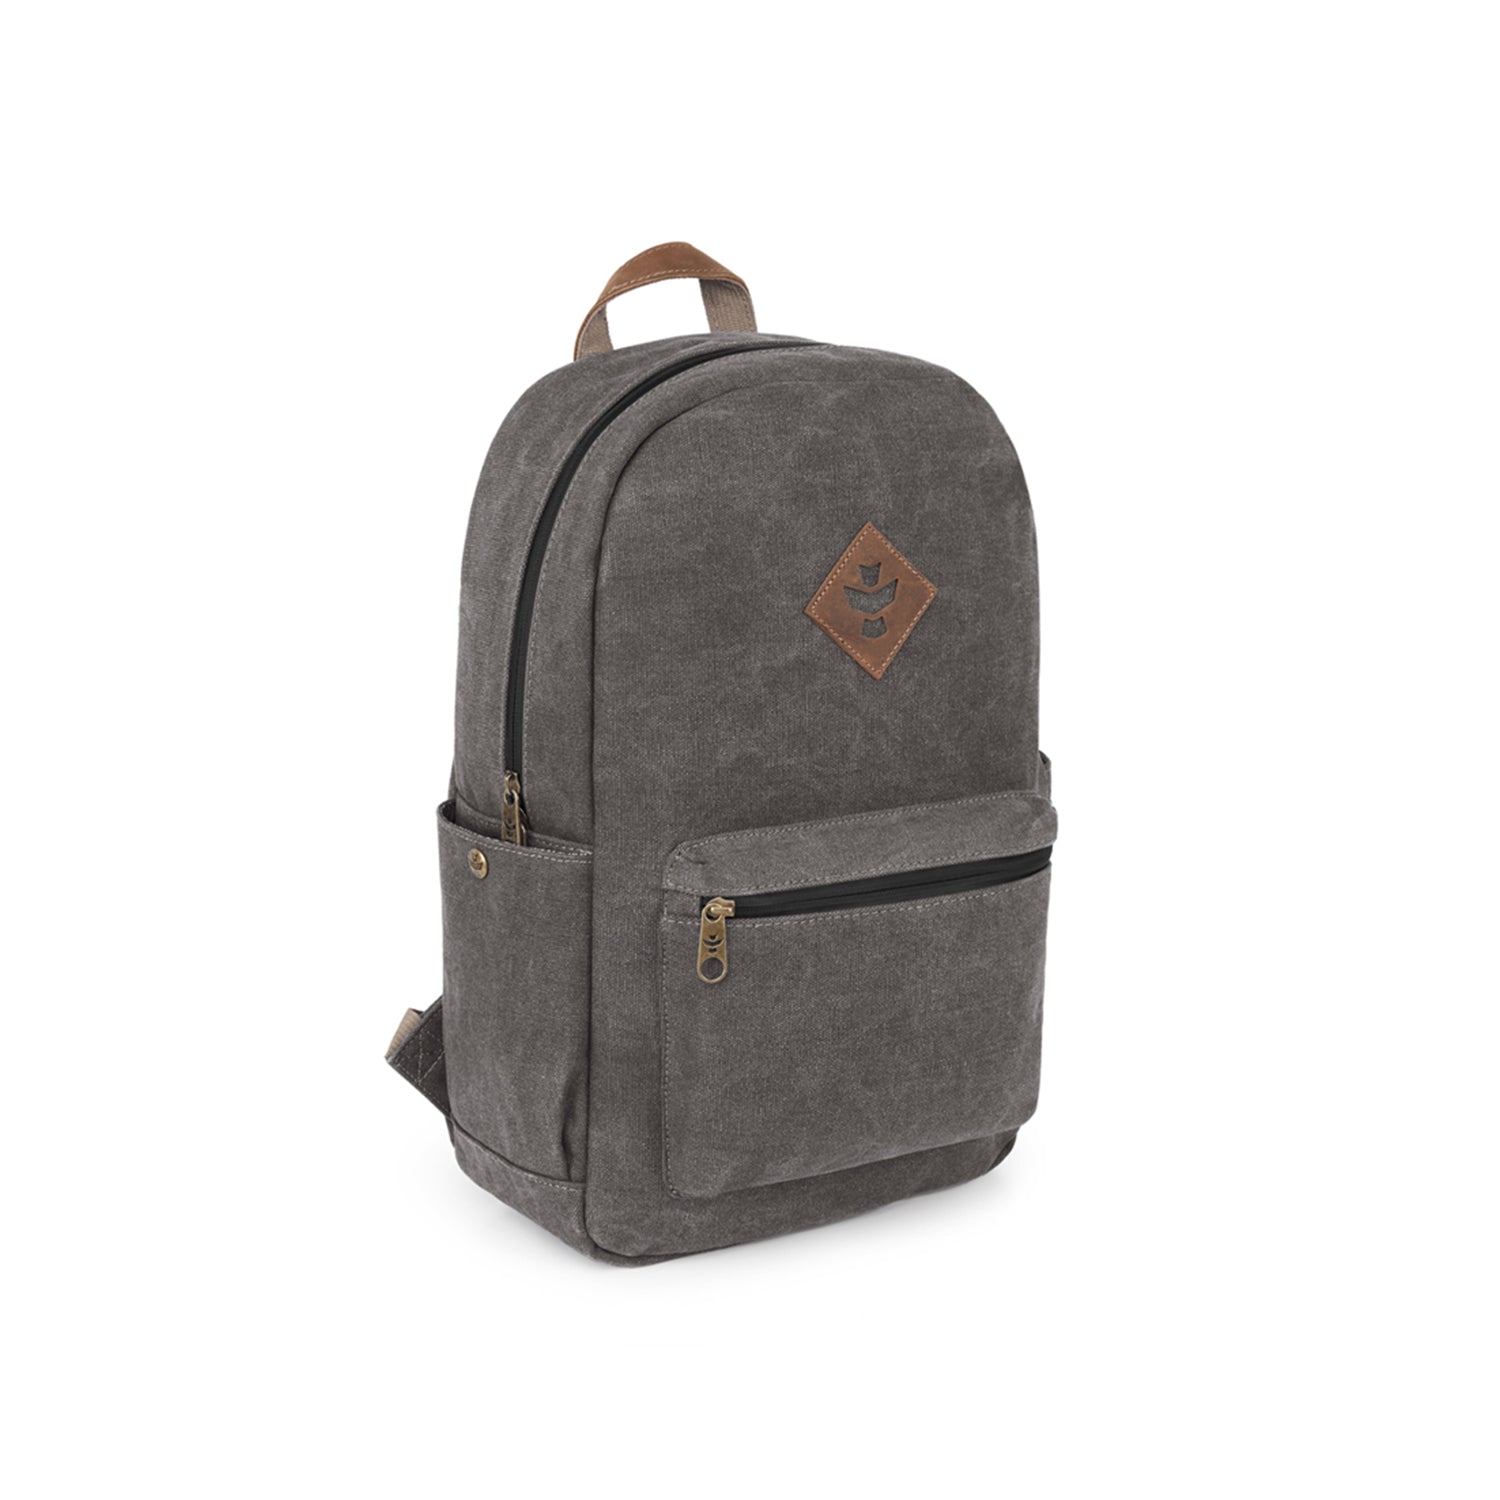 Ash Canvas Smell Proof Water Resistant Backpack Bag